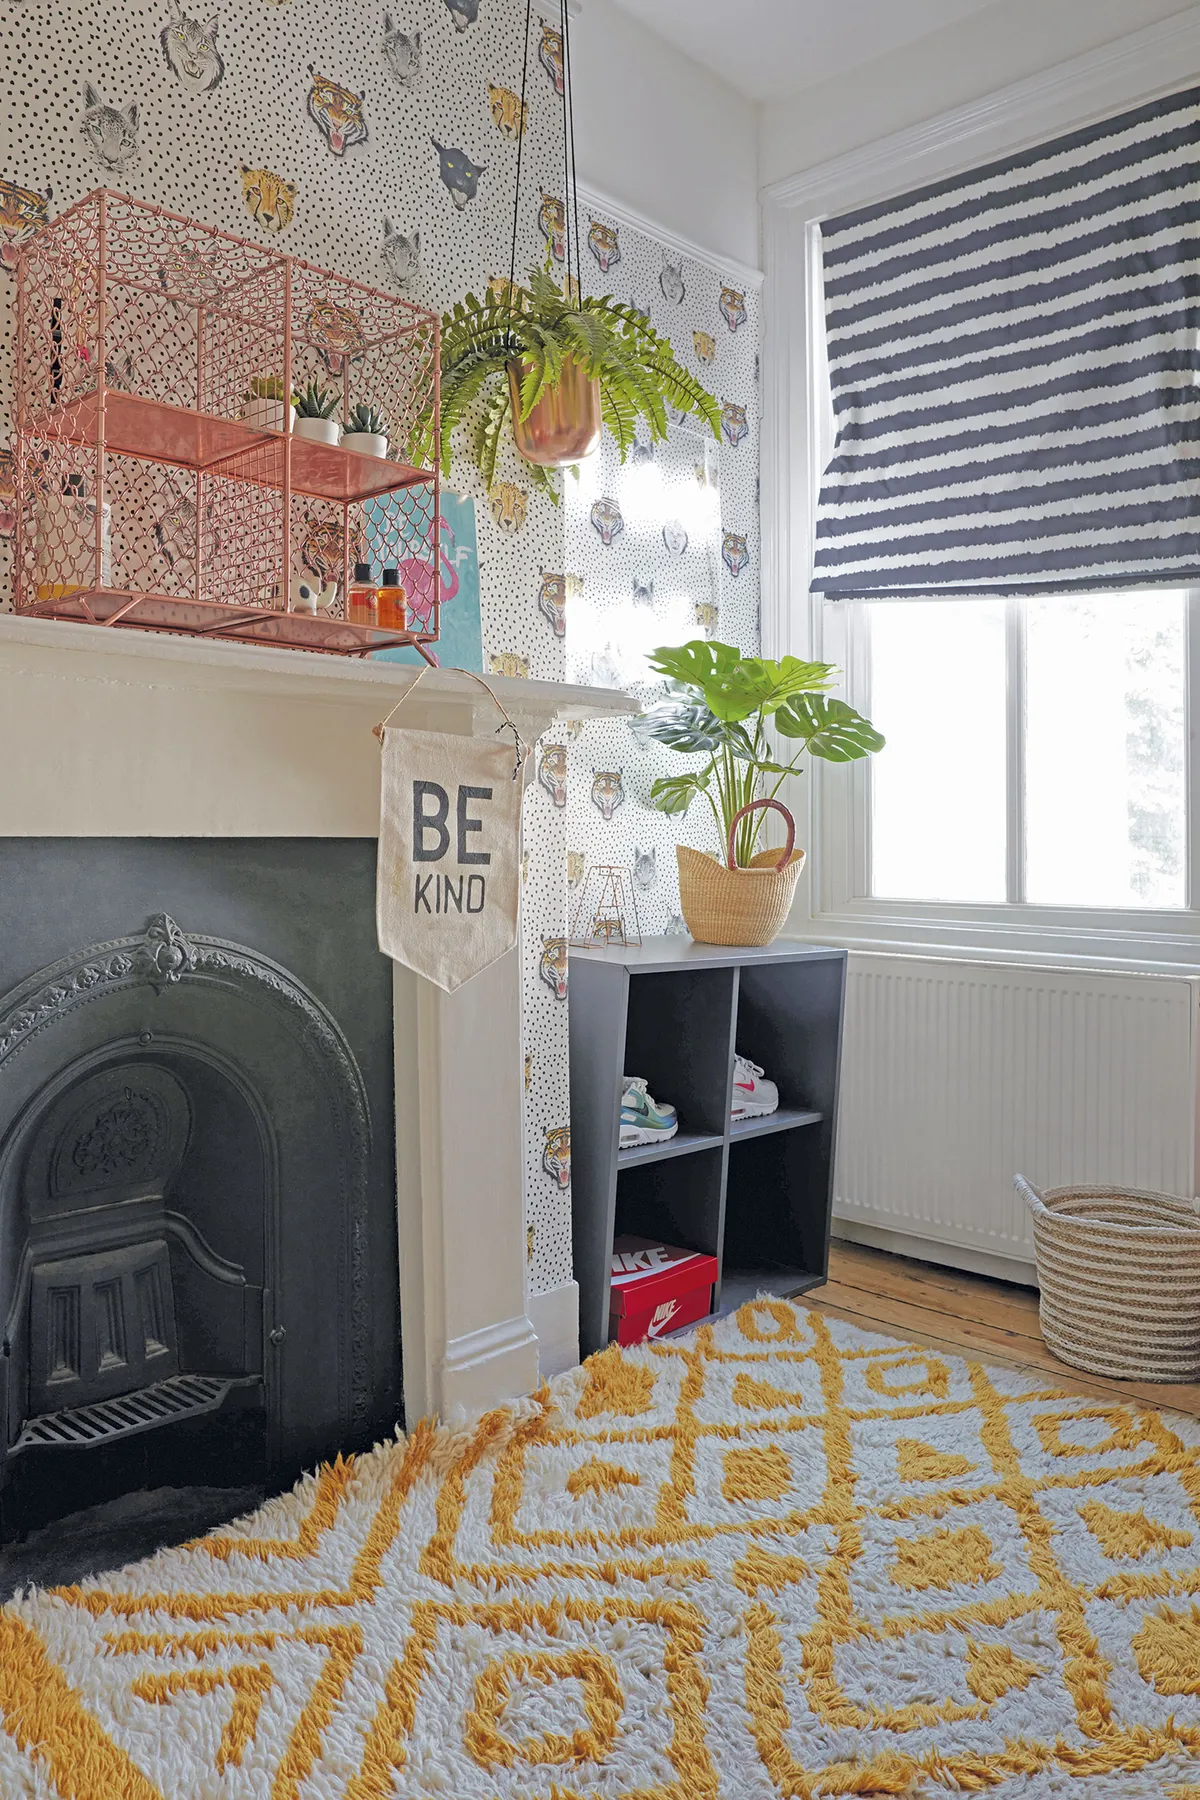 ‘The Berber-style rug is from La Redoute; it has a beautiful bold impact on the room while giving a soft, warm finish. The wildlife-inspired wallpaper was my daughter’s choice as she loves all things nature’